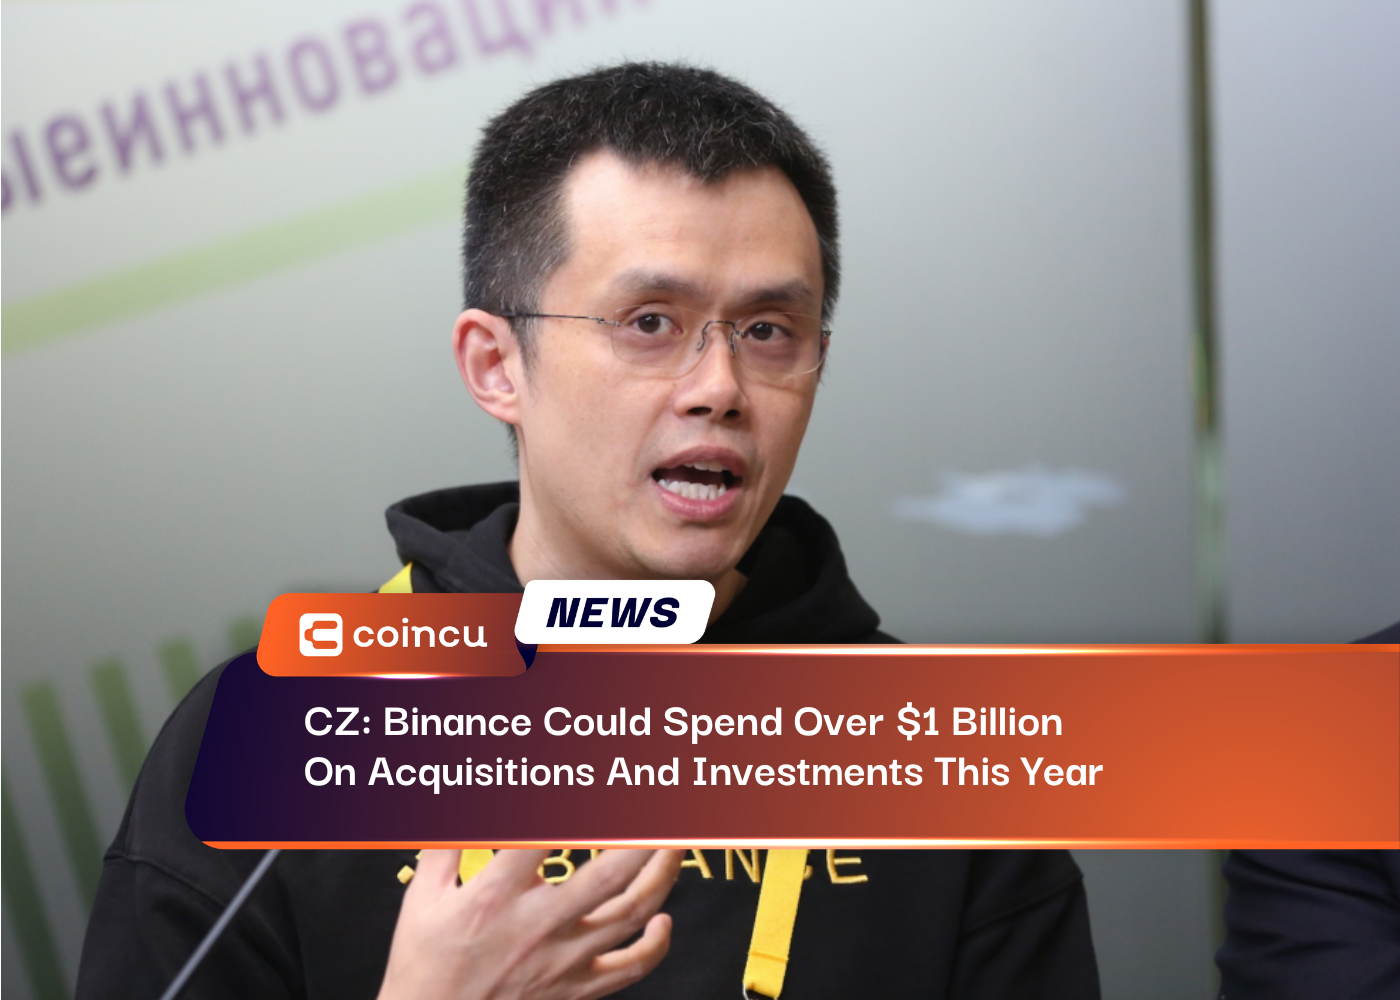 CZ: Binance Could Spend Over $1 Billion On Acquisitions And Investments This Year